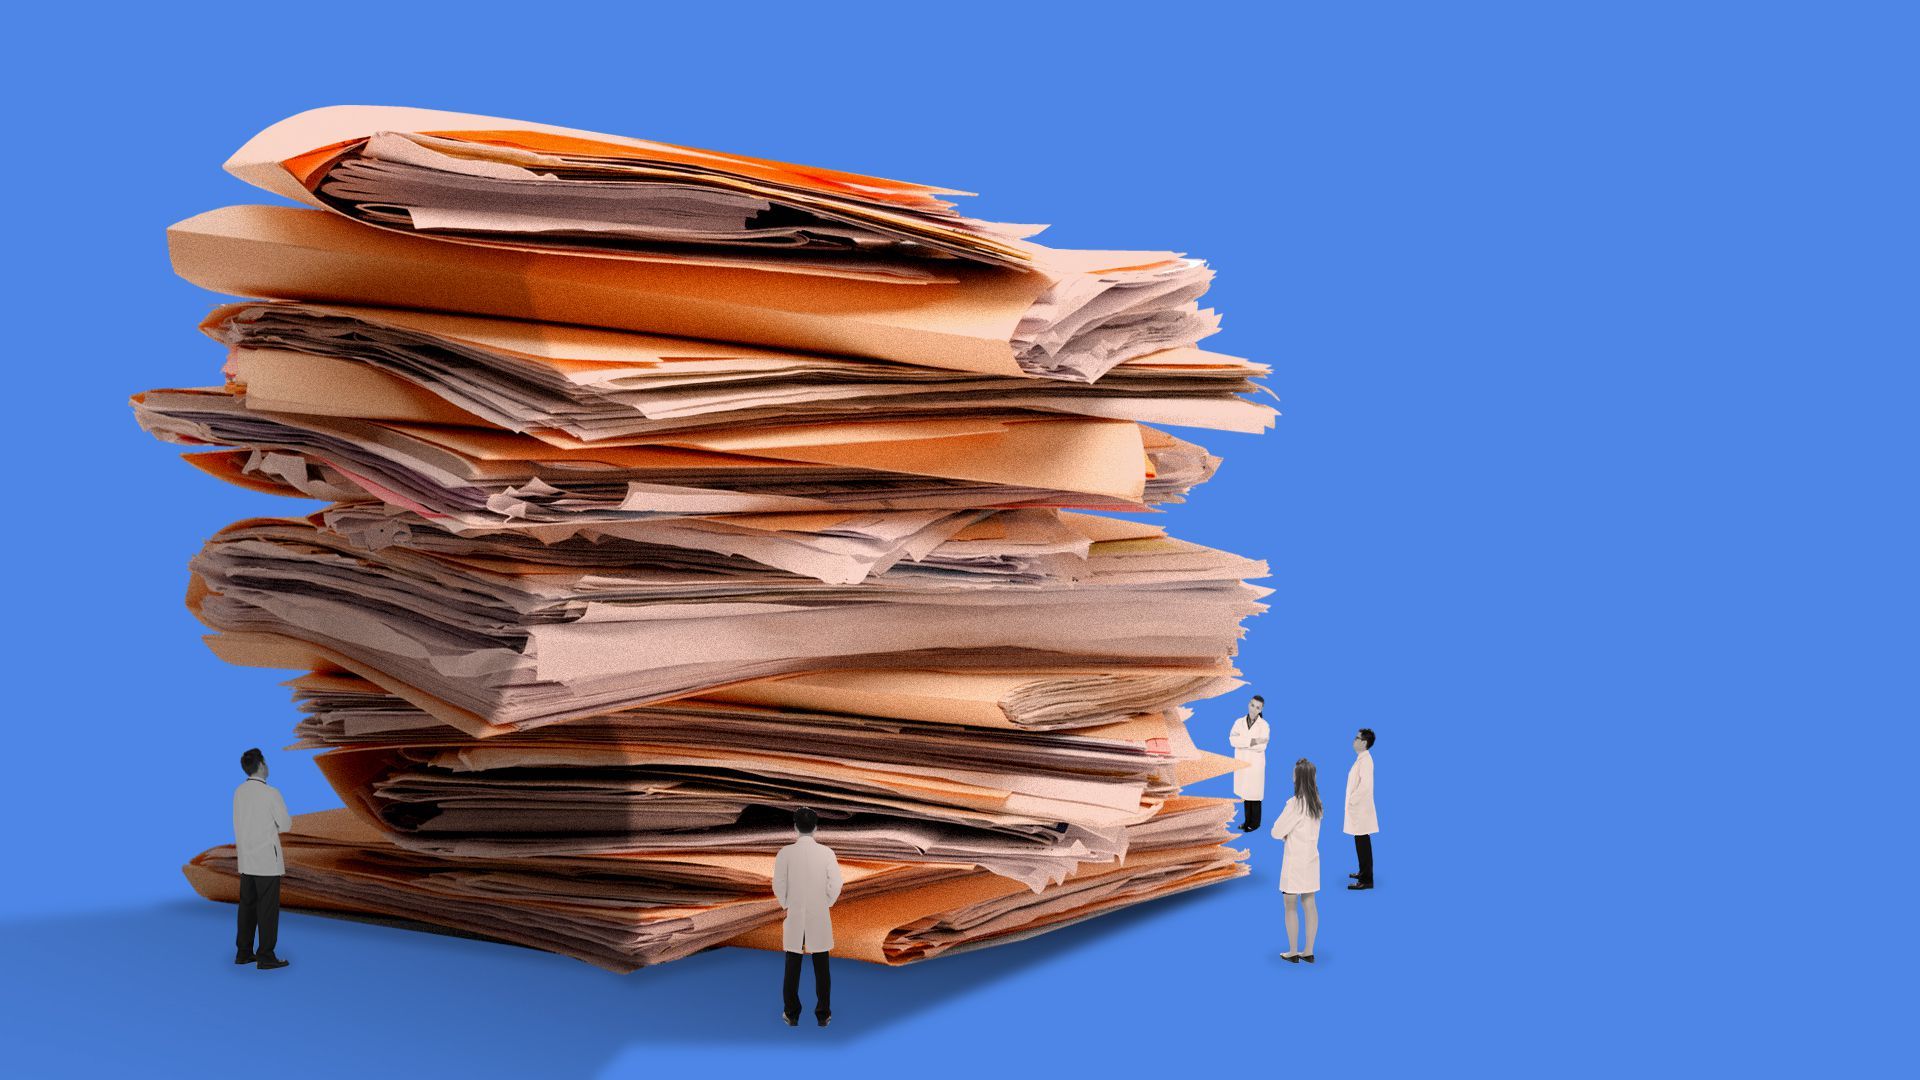 People in lab coats look up at an enormous stack of papers.